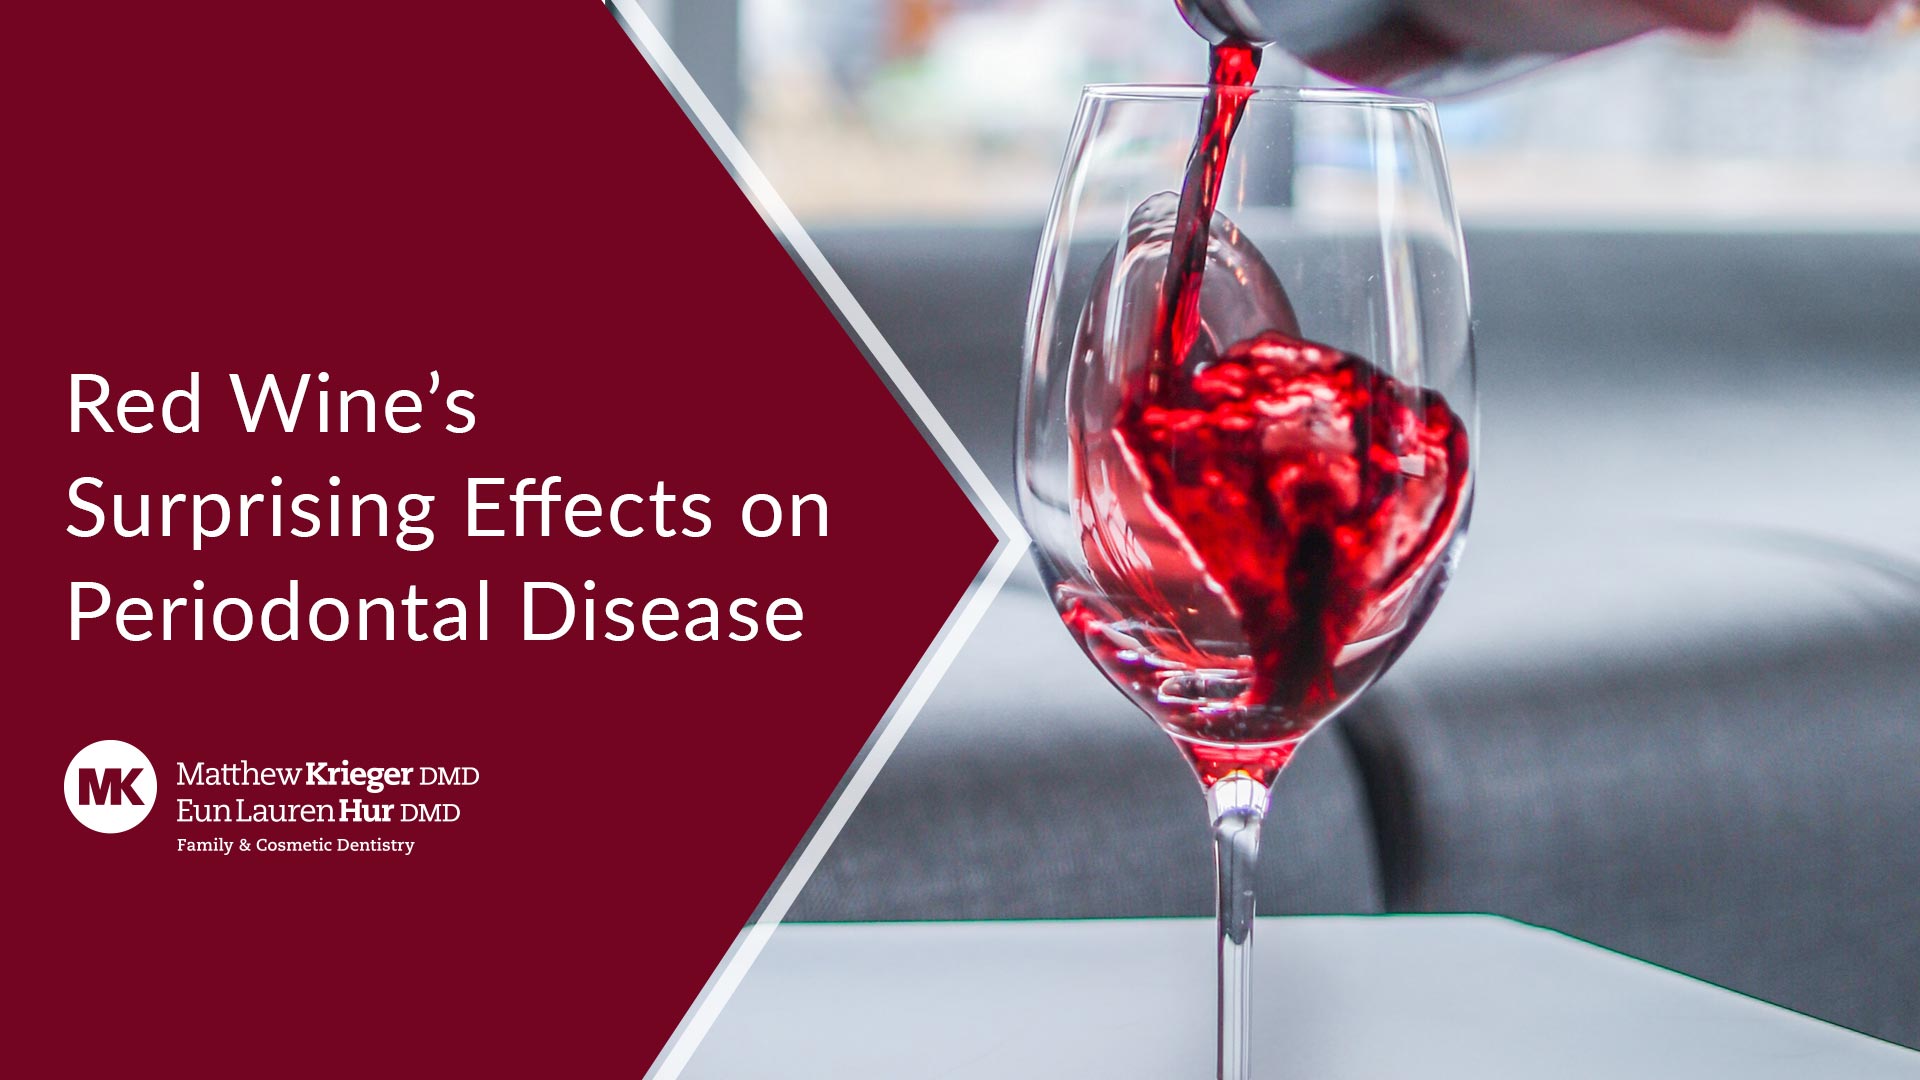 Red Wine’s Surprising Effects on Periodontal Disease